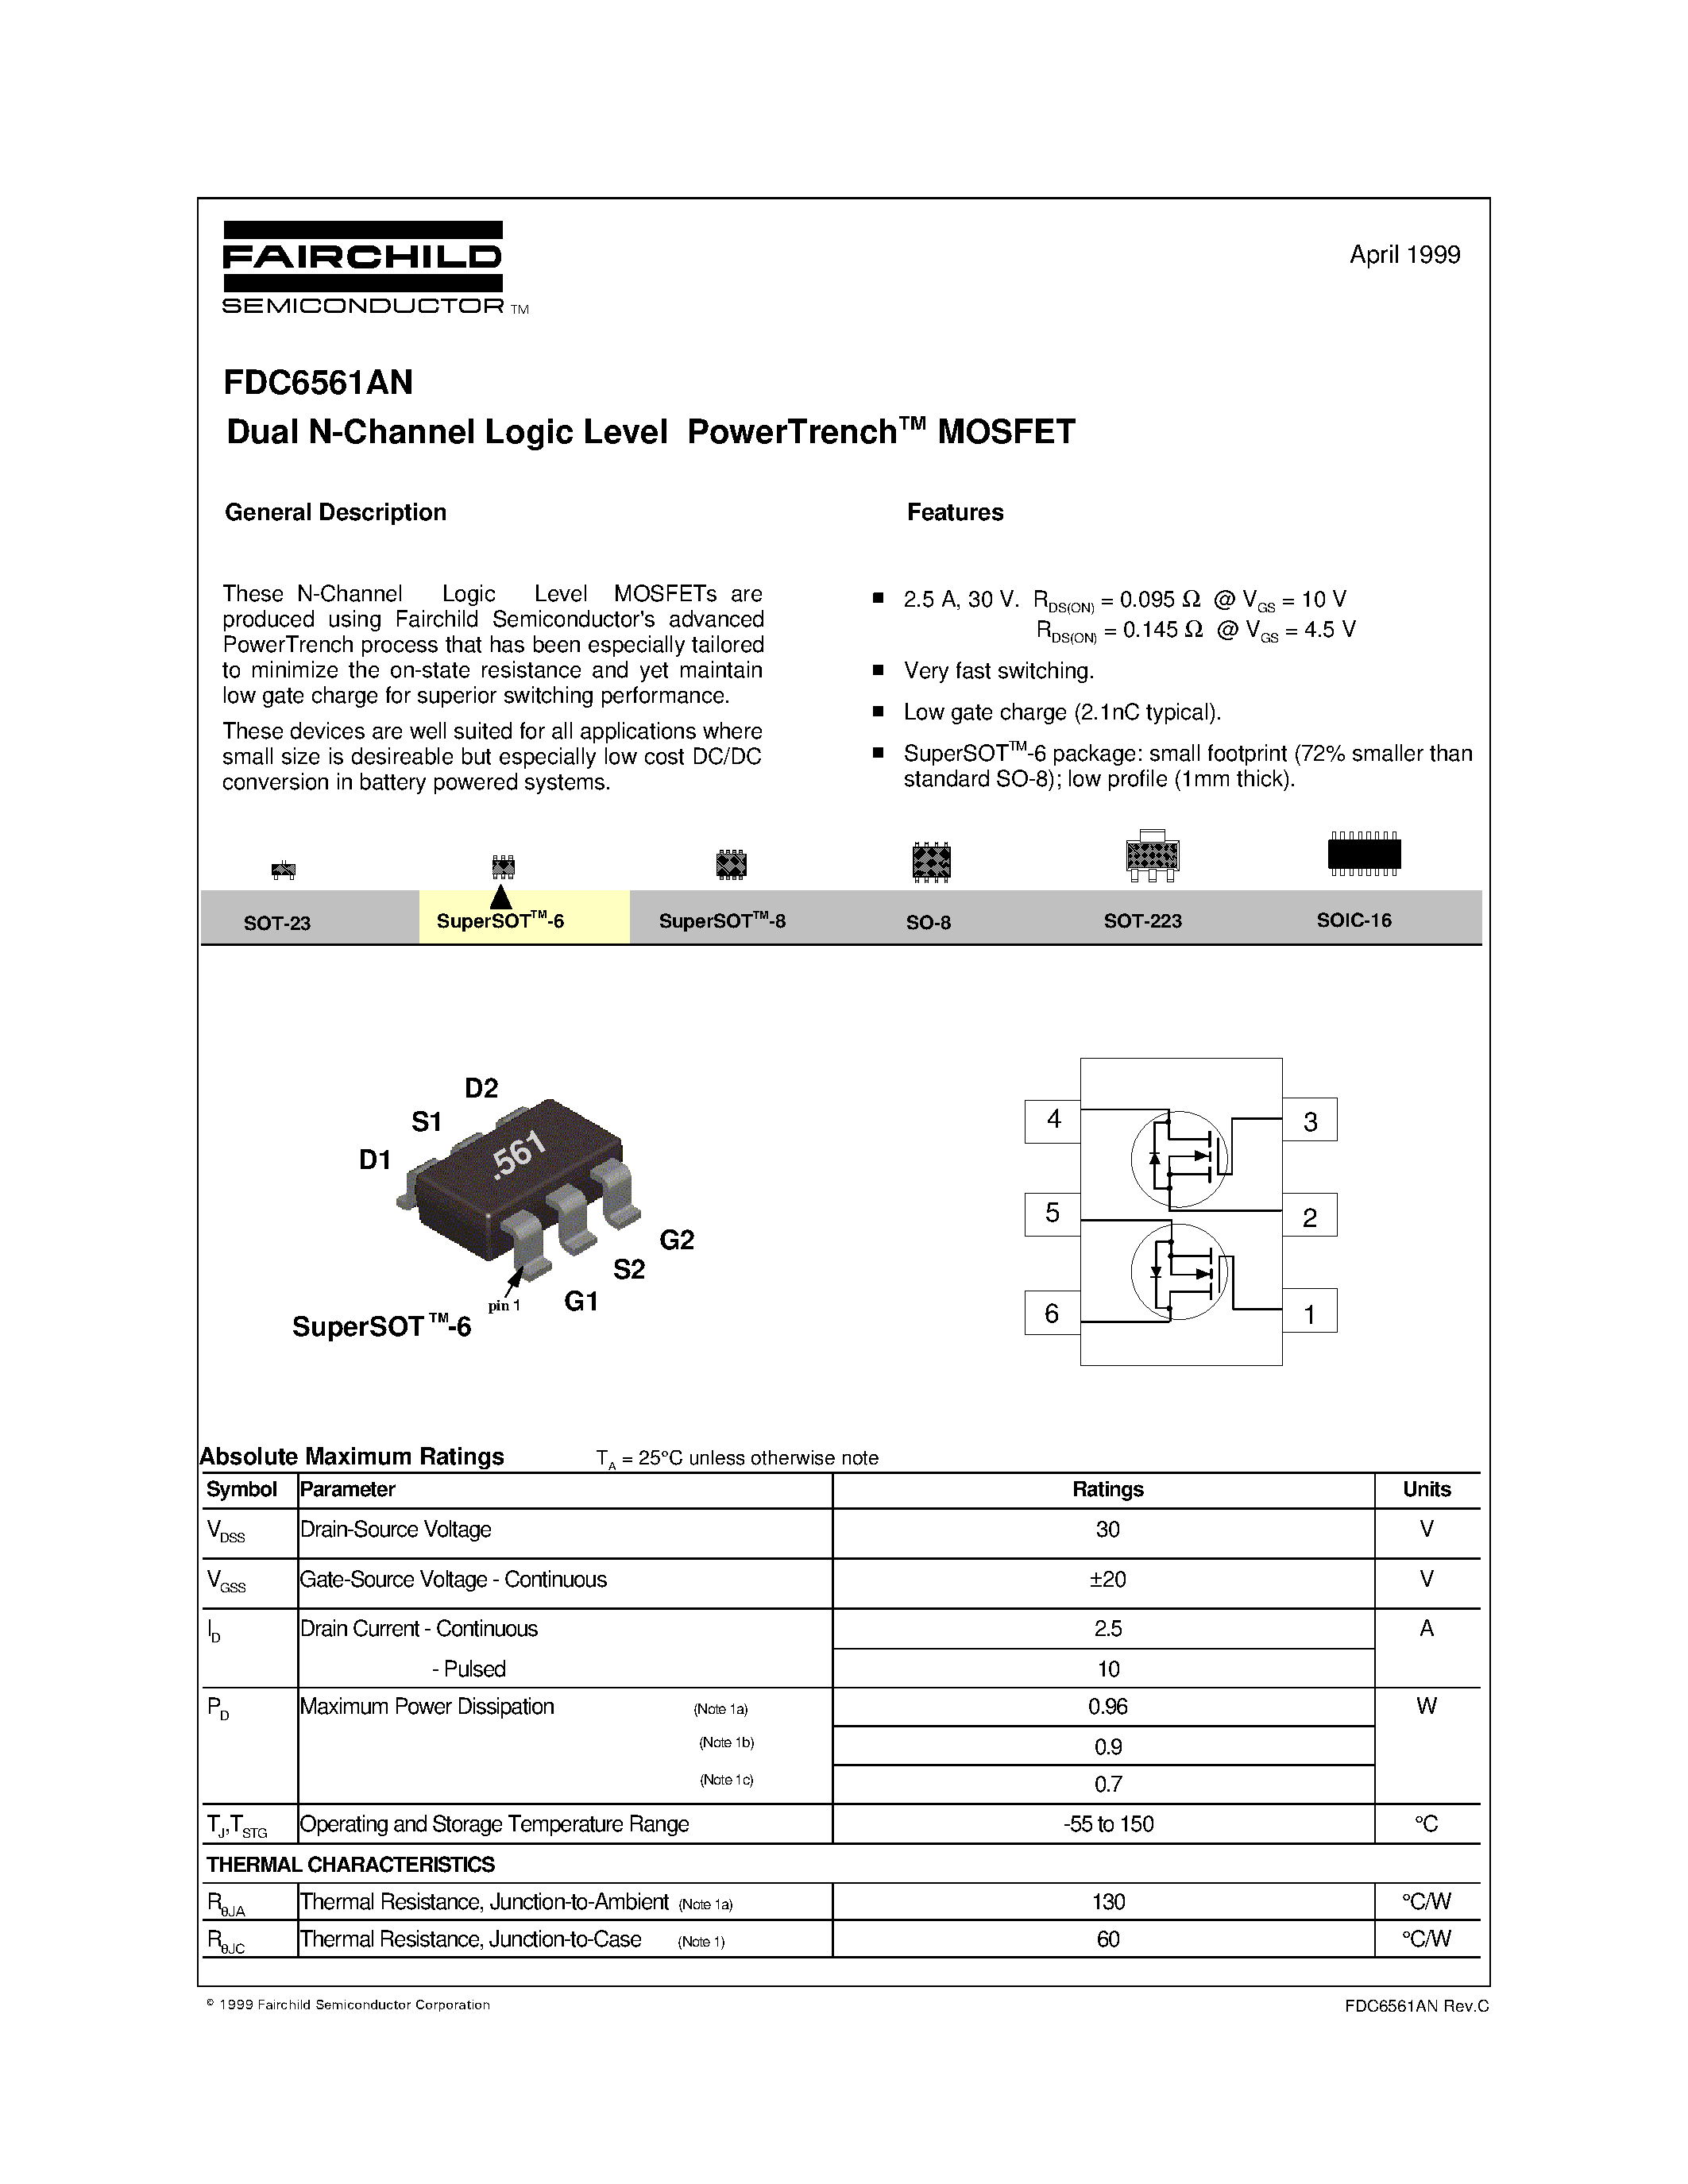 Даташит FDC6561AN - Dual N-Channel Logic Level PowerTrenchTM MOSFET страница 1